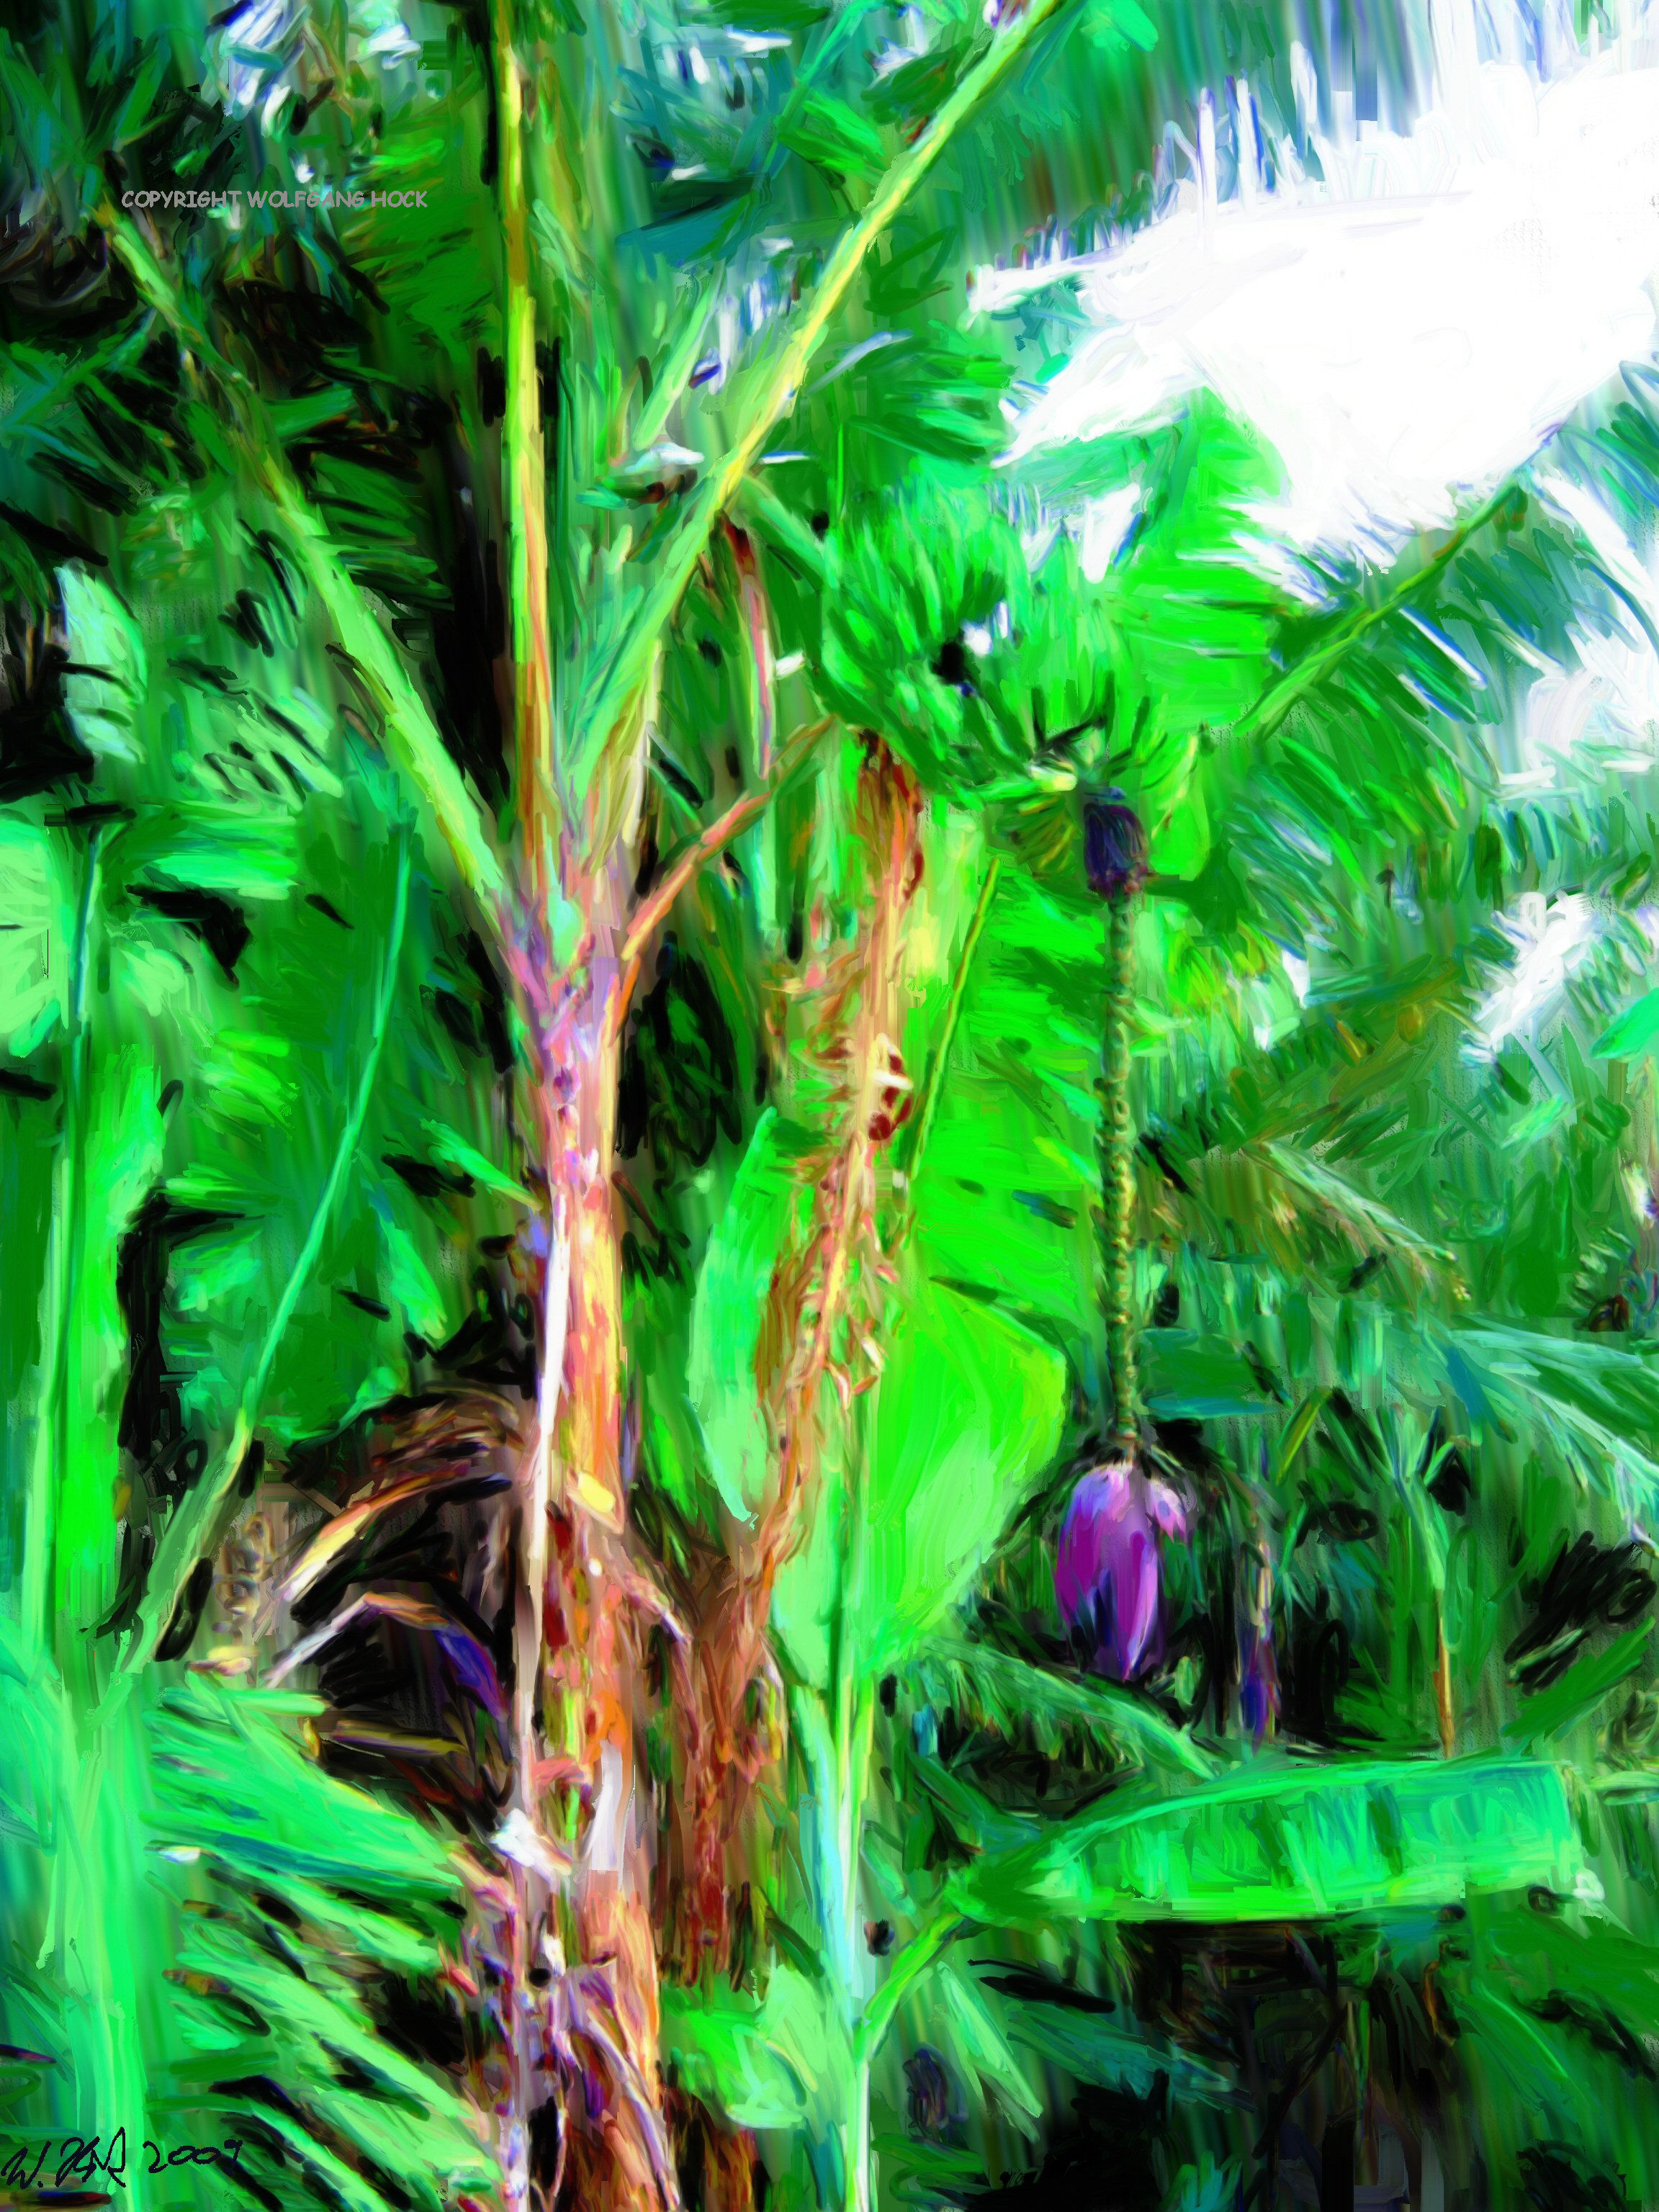 Banana tree 2009   Inkjet printed computer painting on paper, edition of 5 60 x 44 cm (7,5 megapixel)